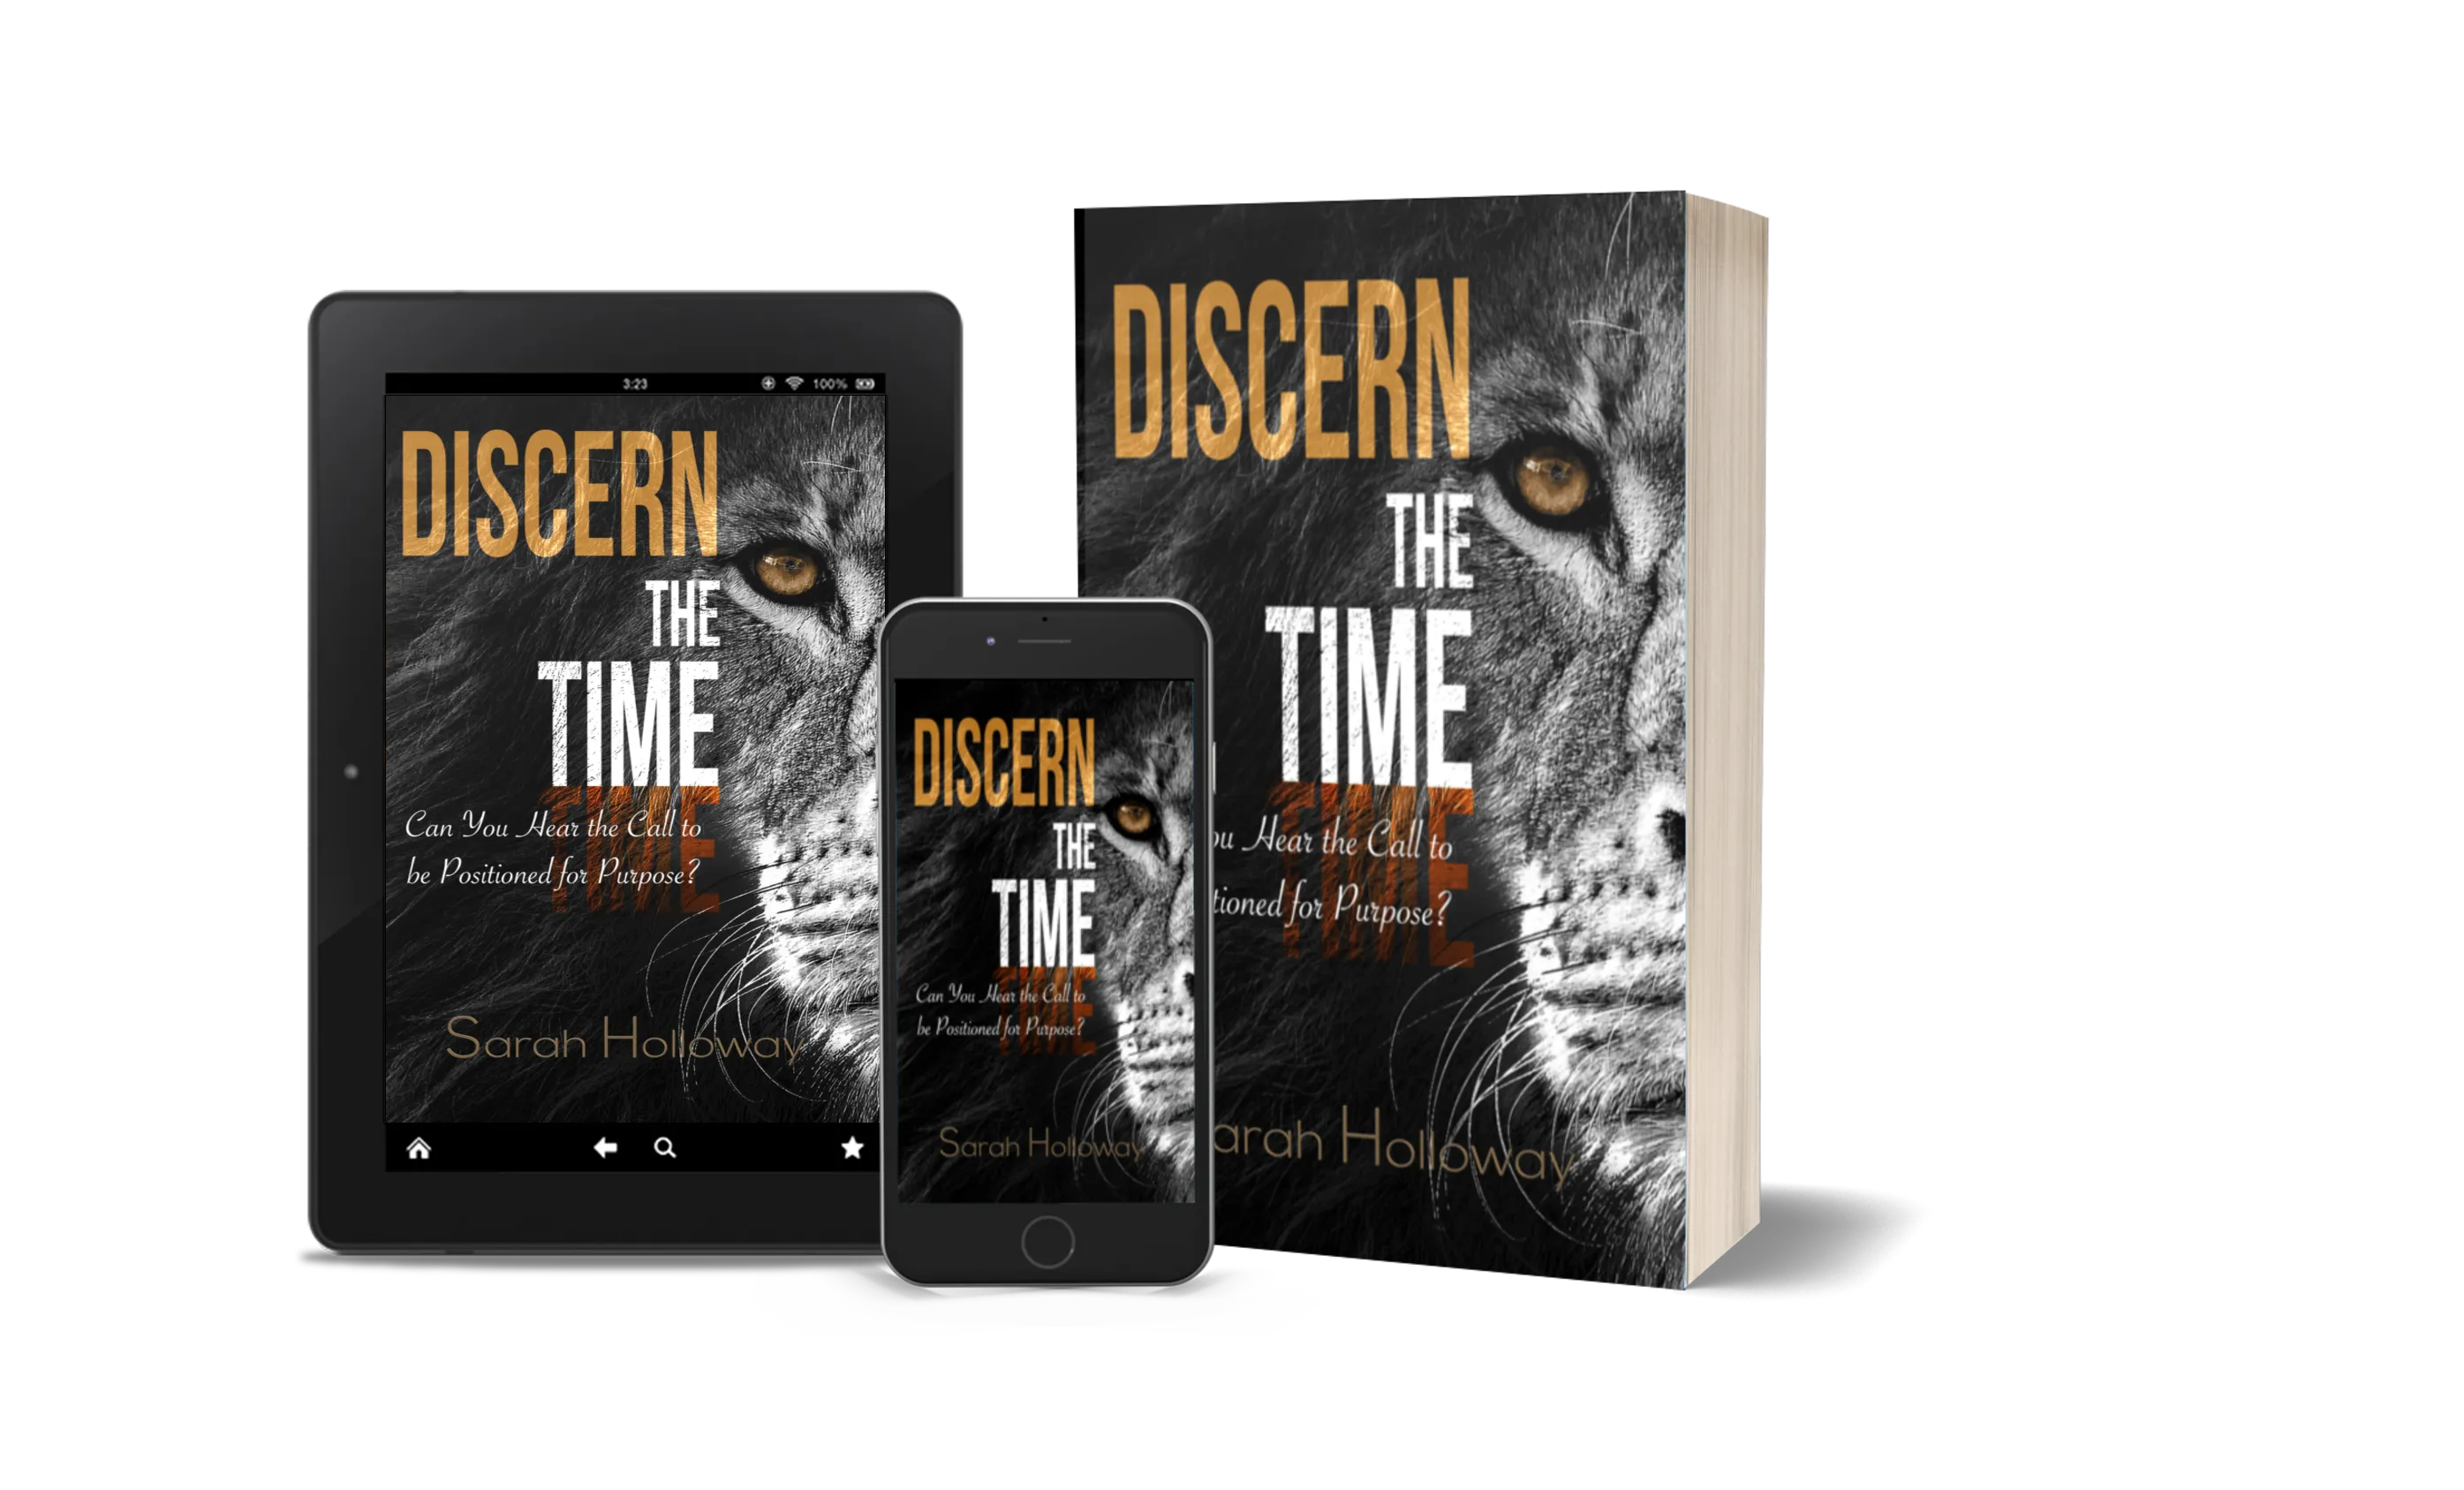 DISCERN THE TIME